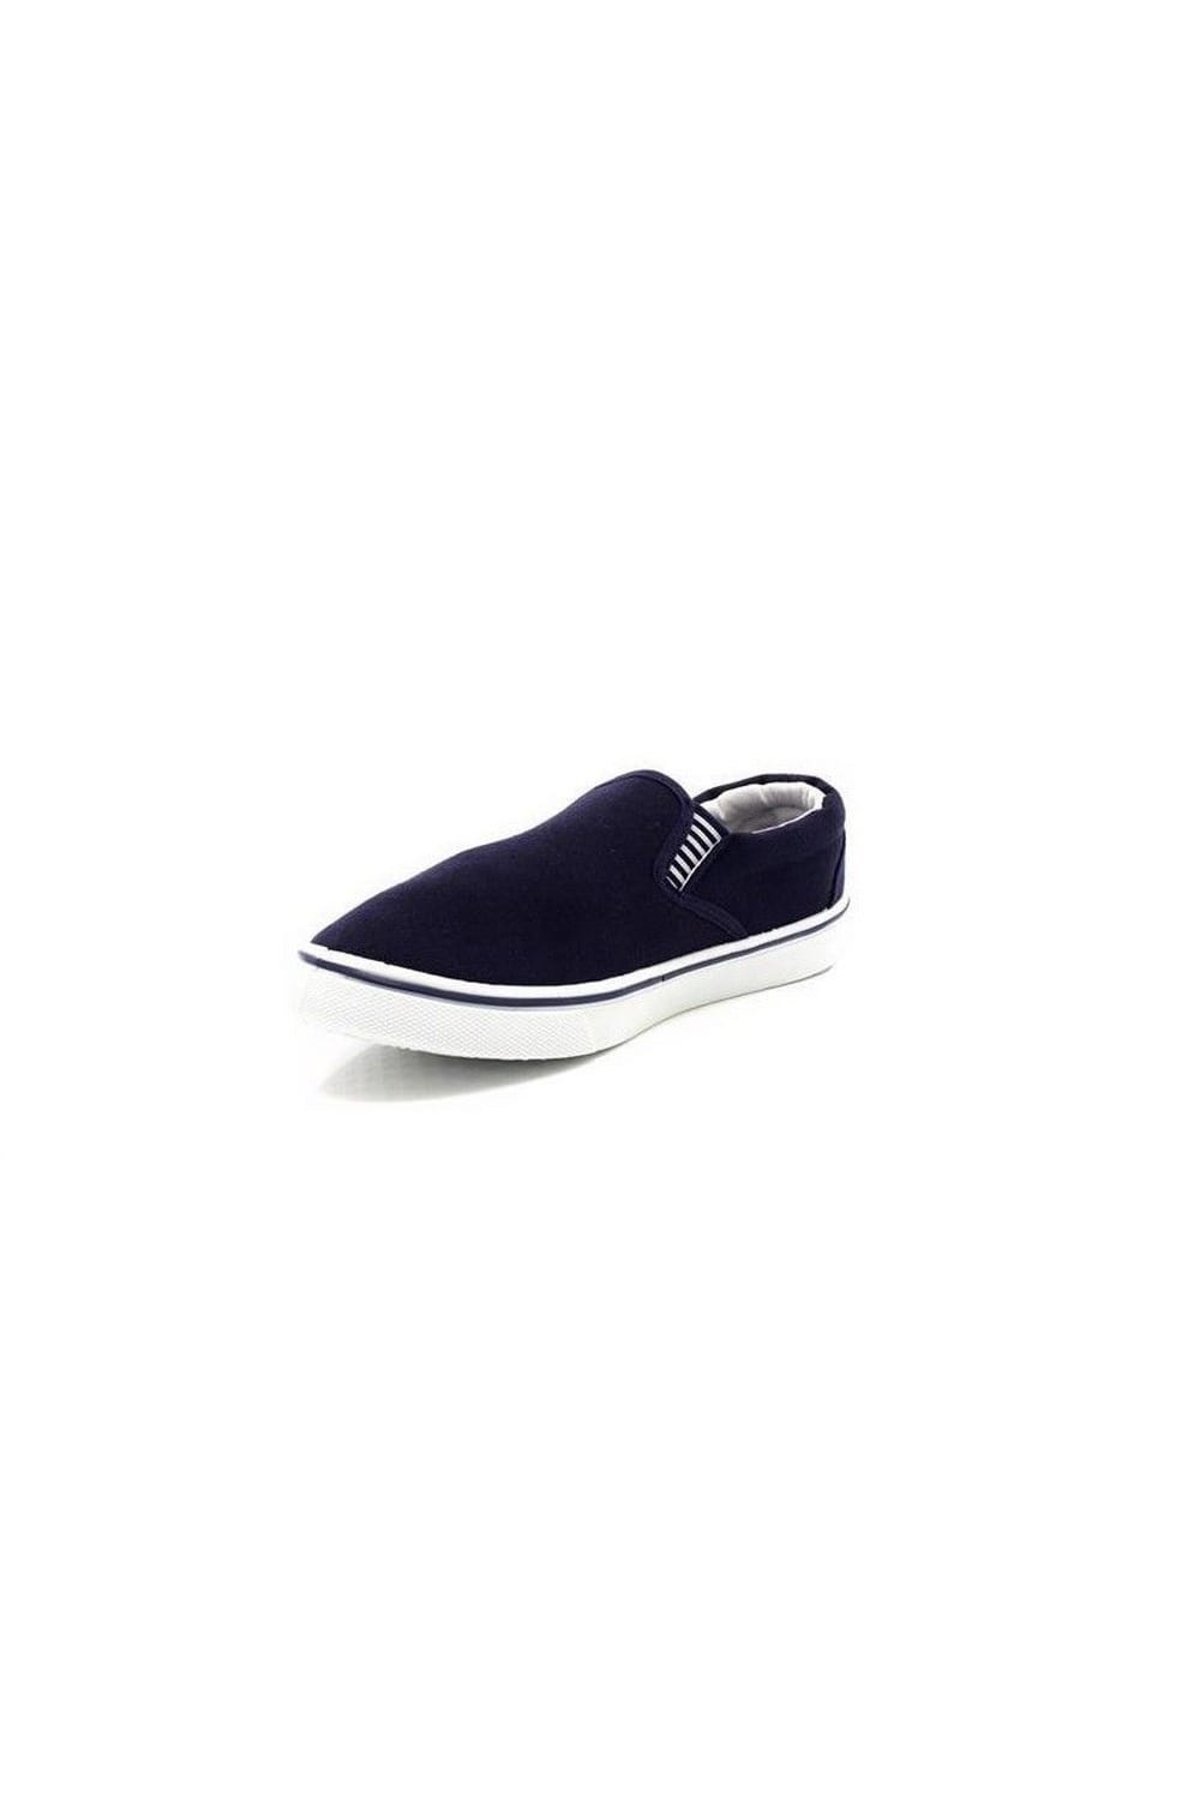 Dek Mens Gusset Casual Navy Blue Canvas Yachting Shoes 7 Sizes 7-13 DF627 